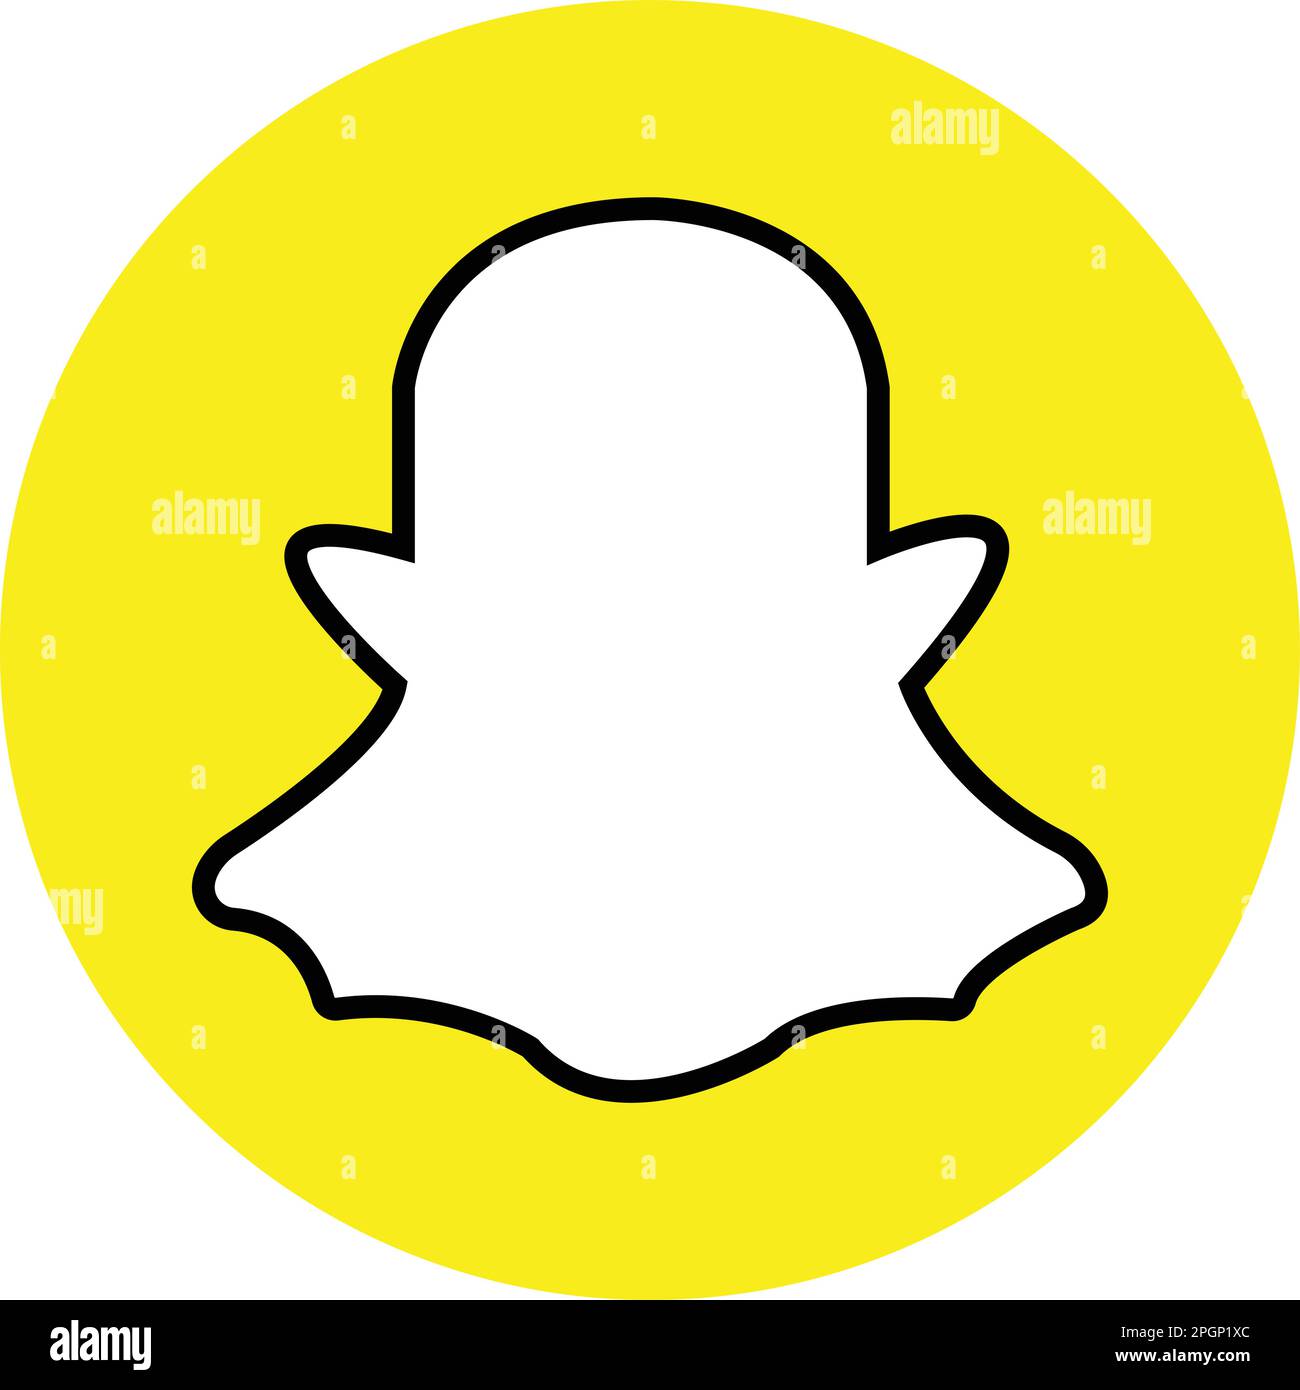 Snapchat logo messenger icon. Realistic social media logotype. Snap chat app button on transparent background. Stock Vector